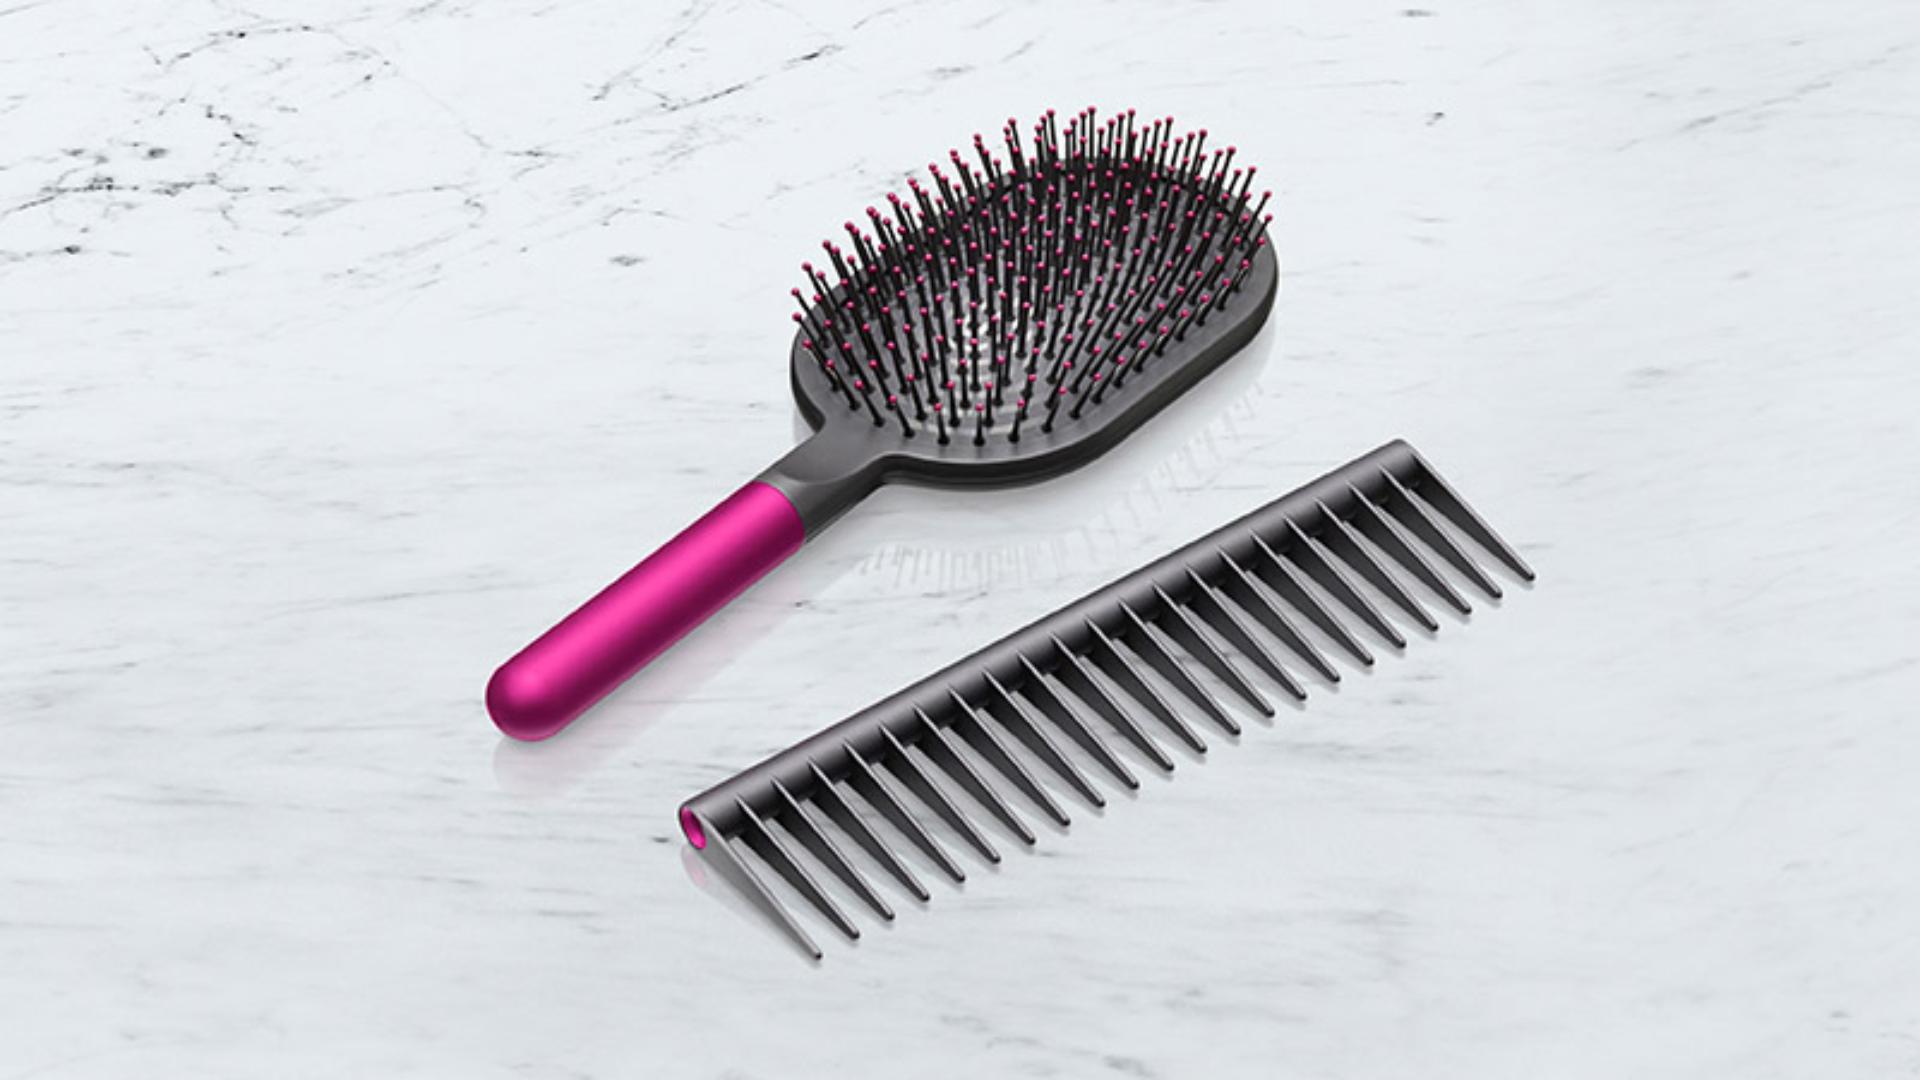 Dyson Mothers Day Accessories Gift Set